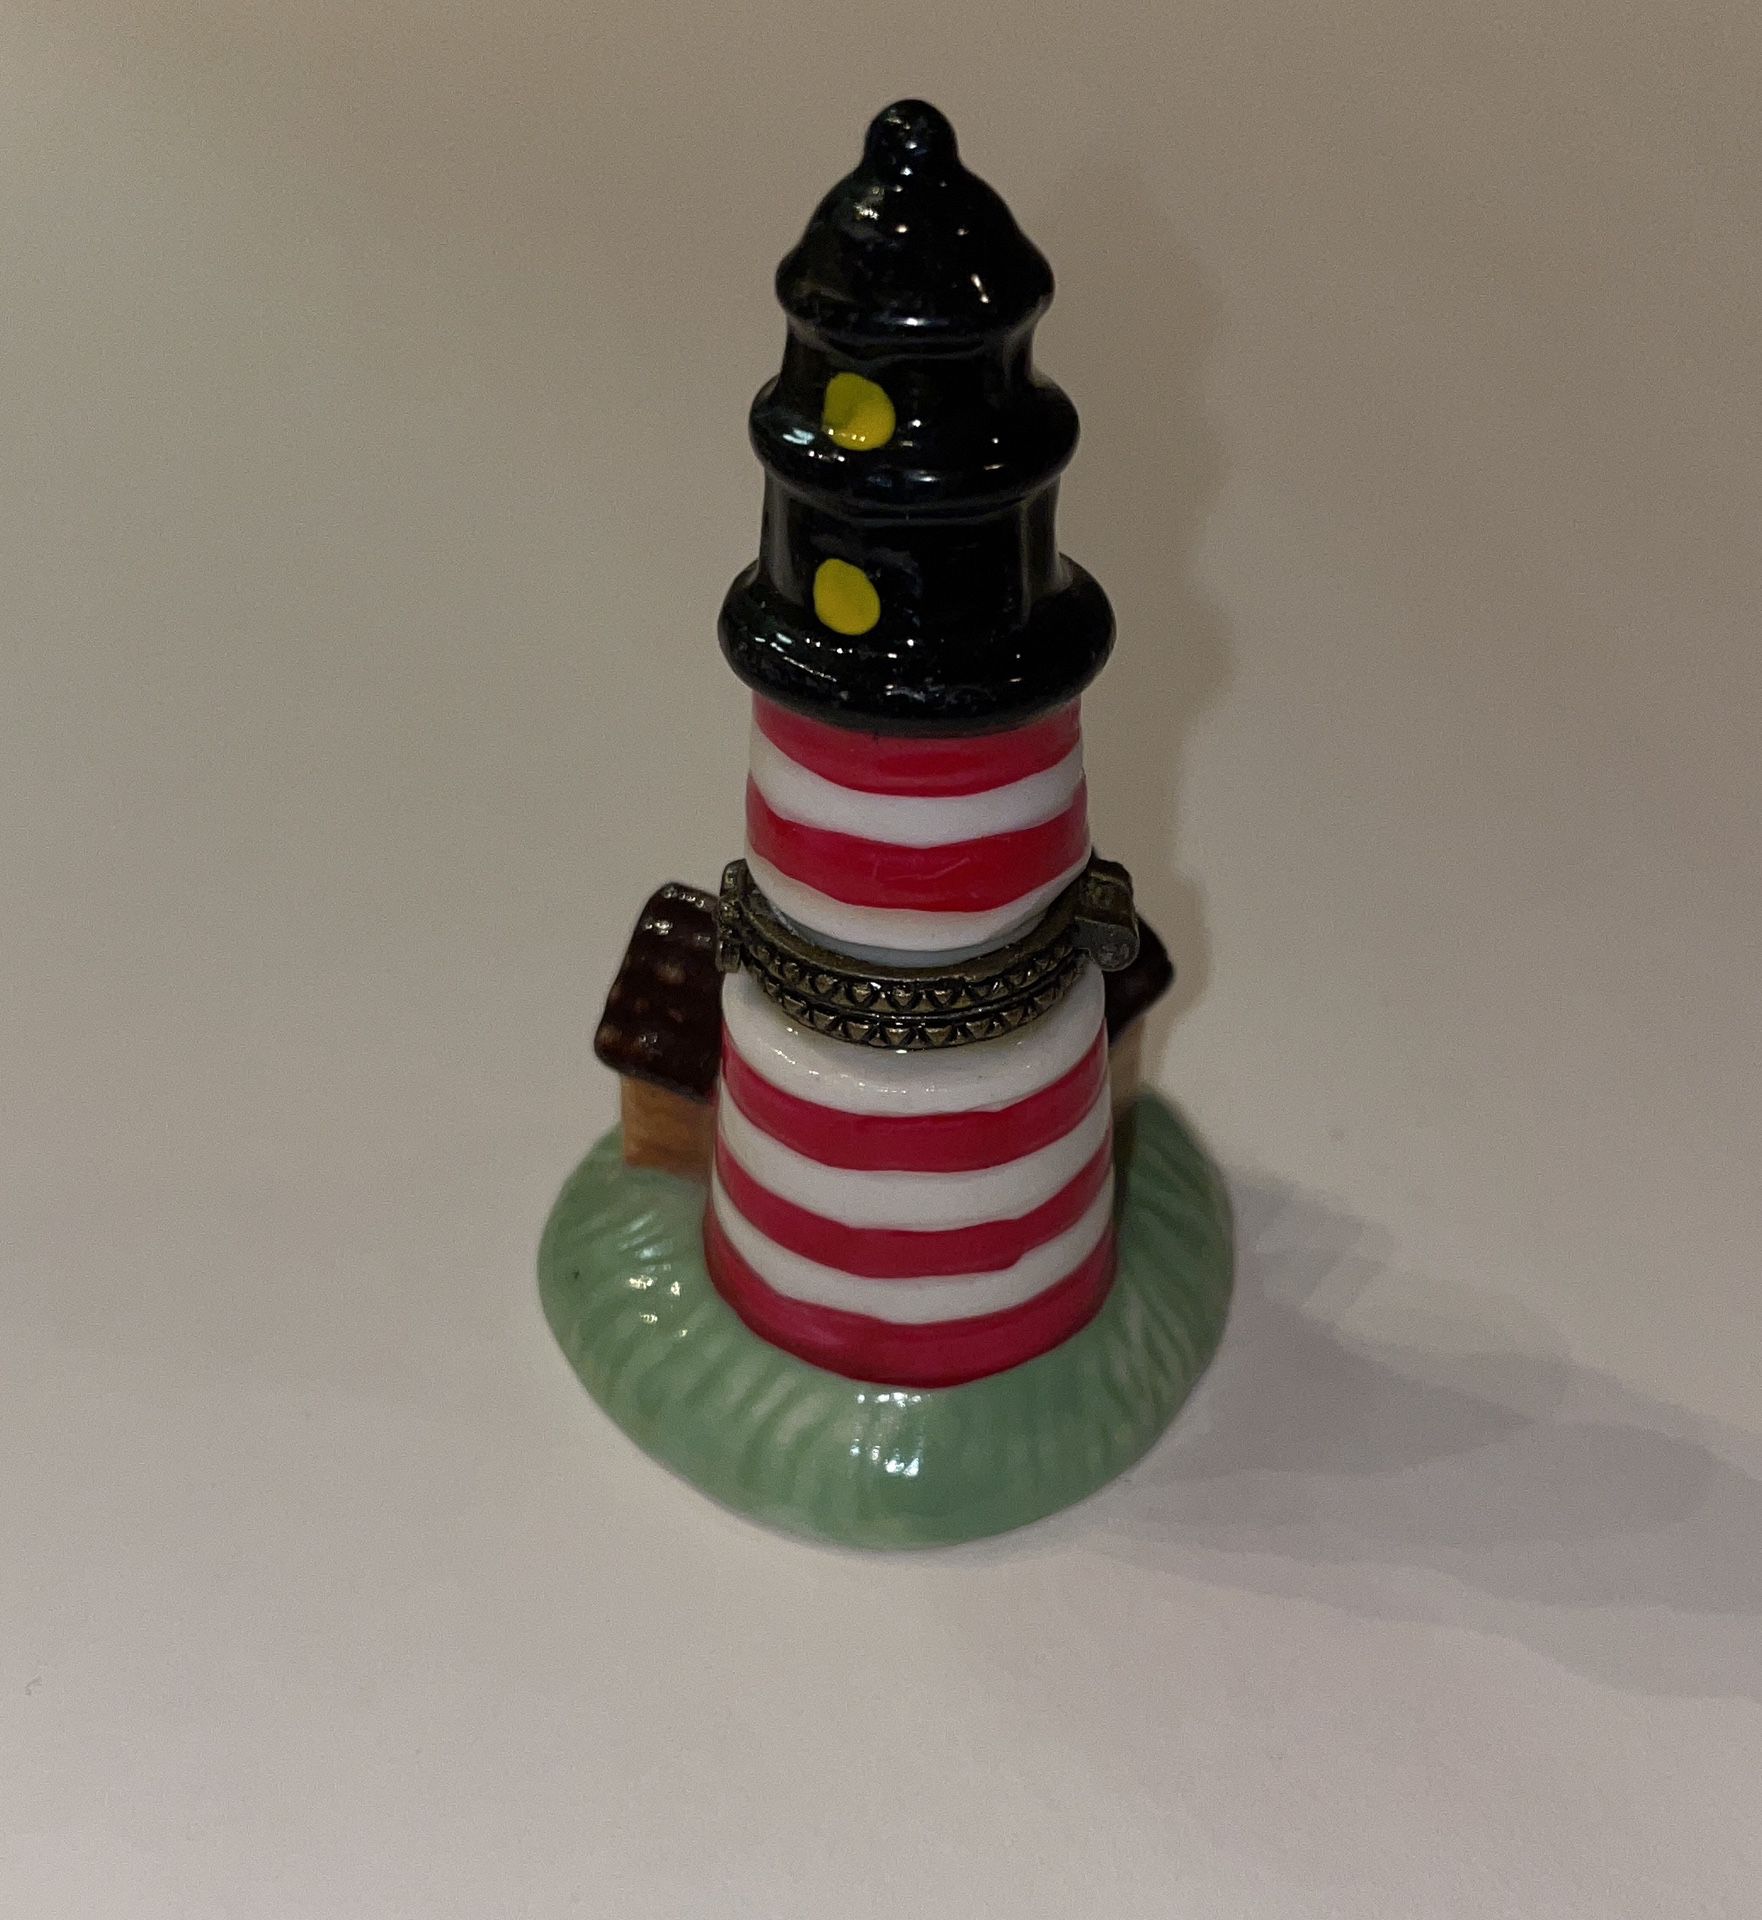 COLORFUL RED & WHITE PORCELAIN LIGHTHOUSE TRINKET BOX  3" TALL